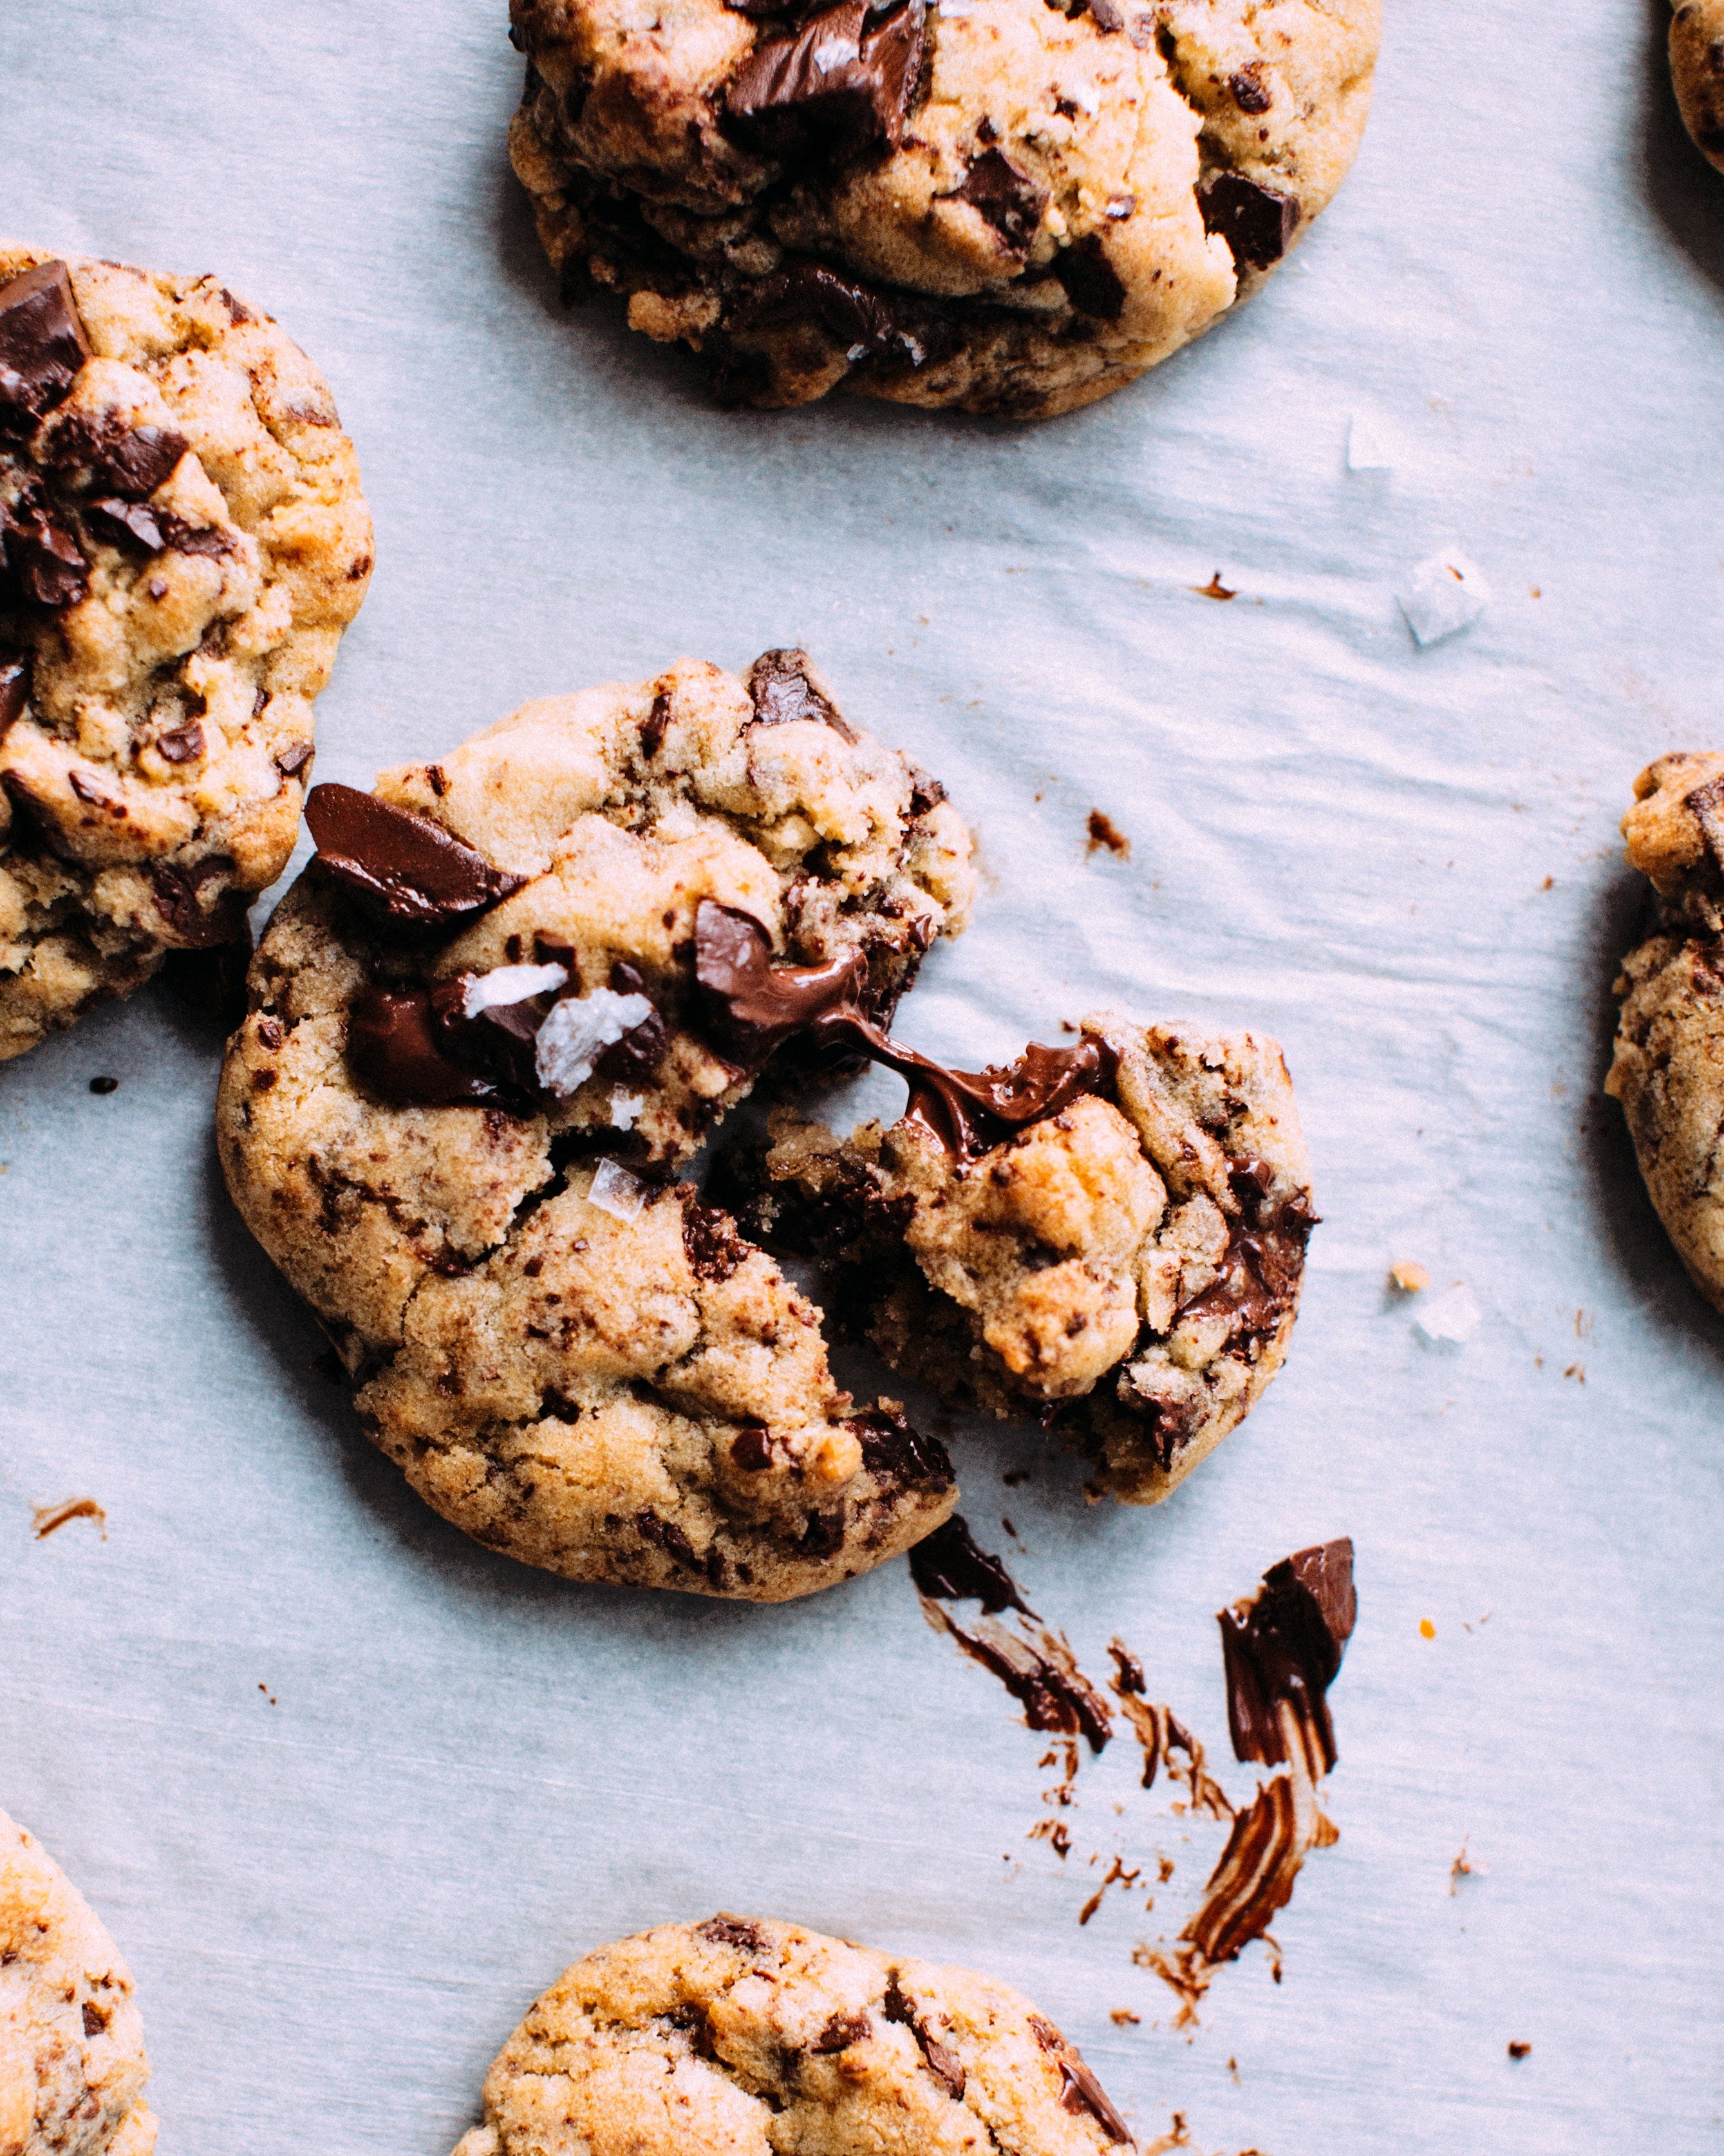 What The World Needs Now Is This Perfect Chocolate Chip Cookie By Declan Wilson Mind Cafe Medium